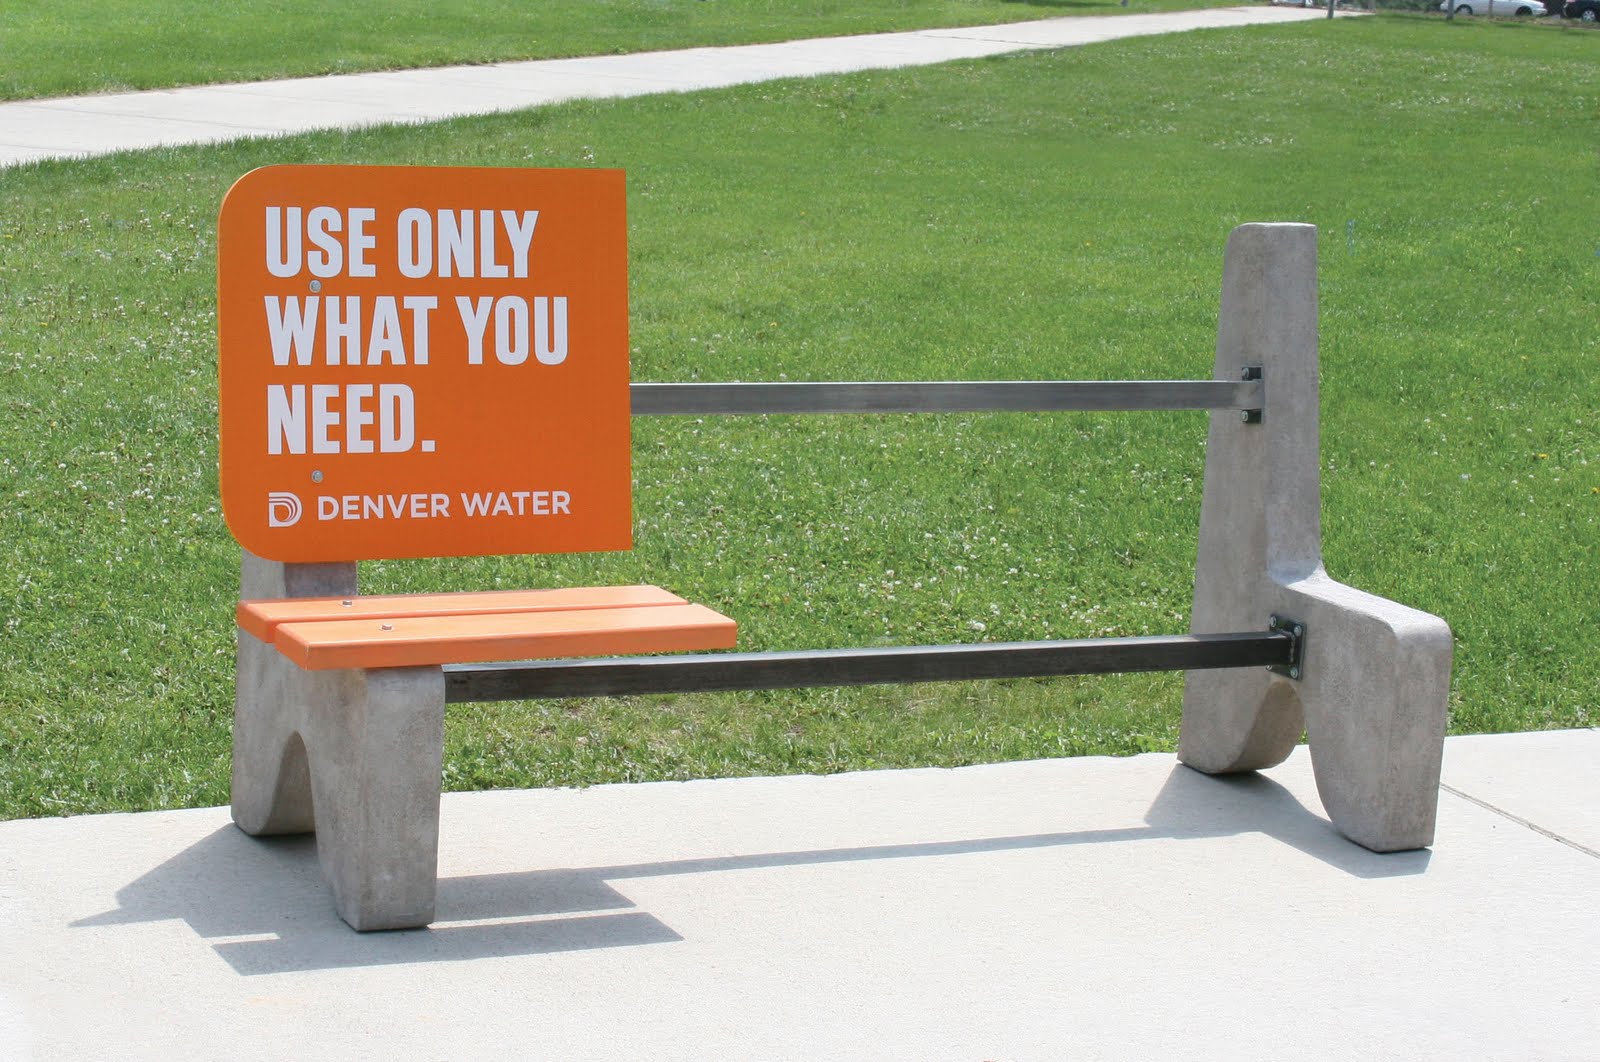 Denver Water – Use Only What You Need